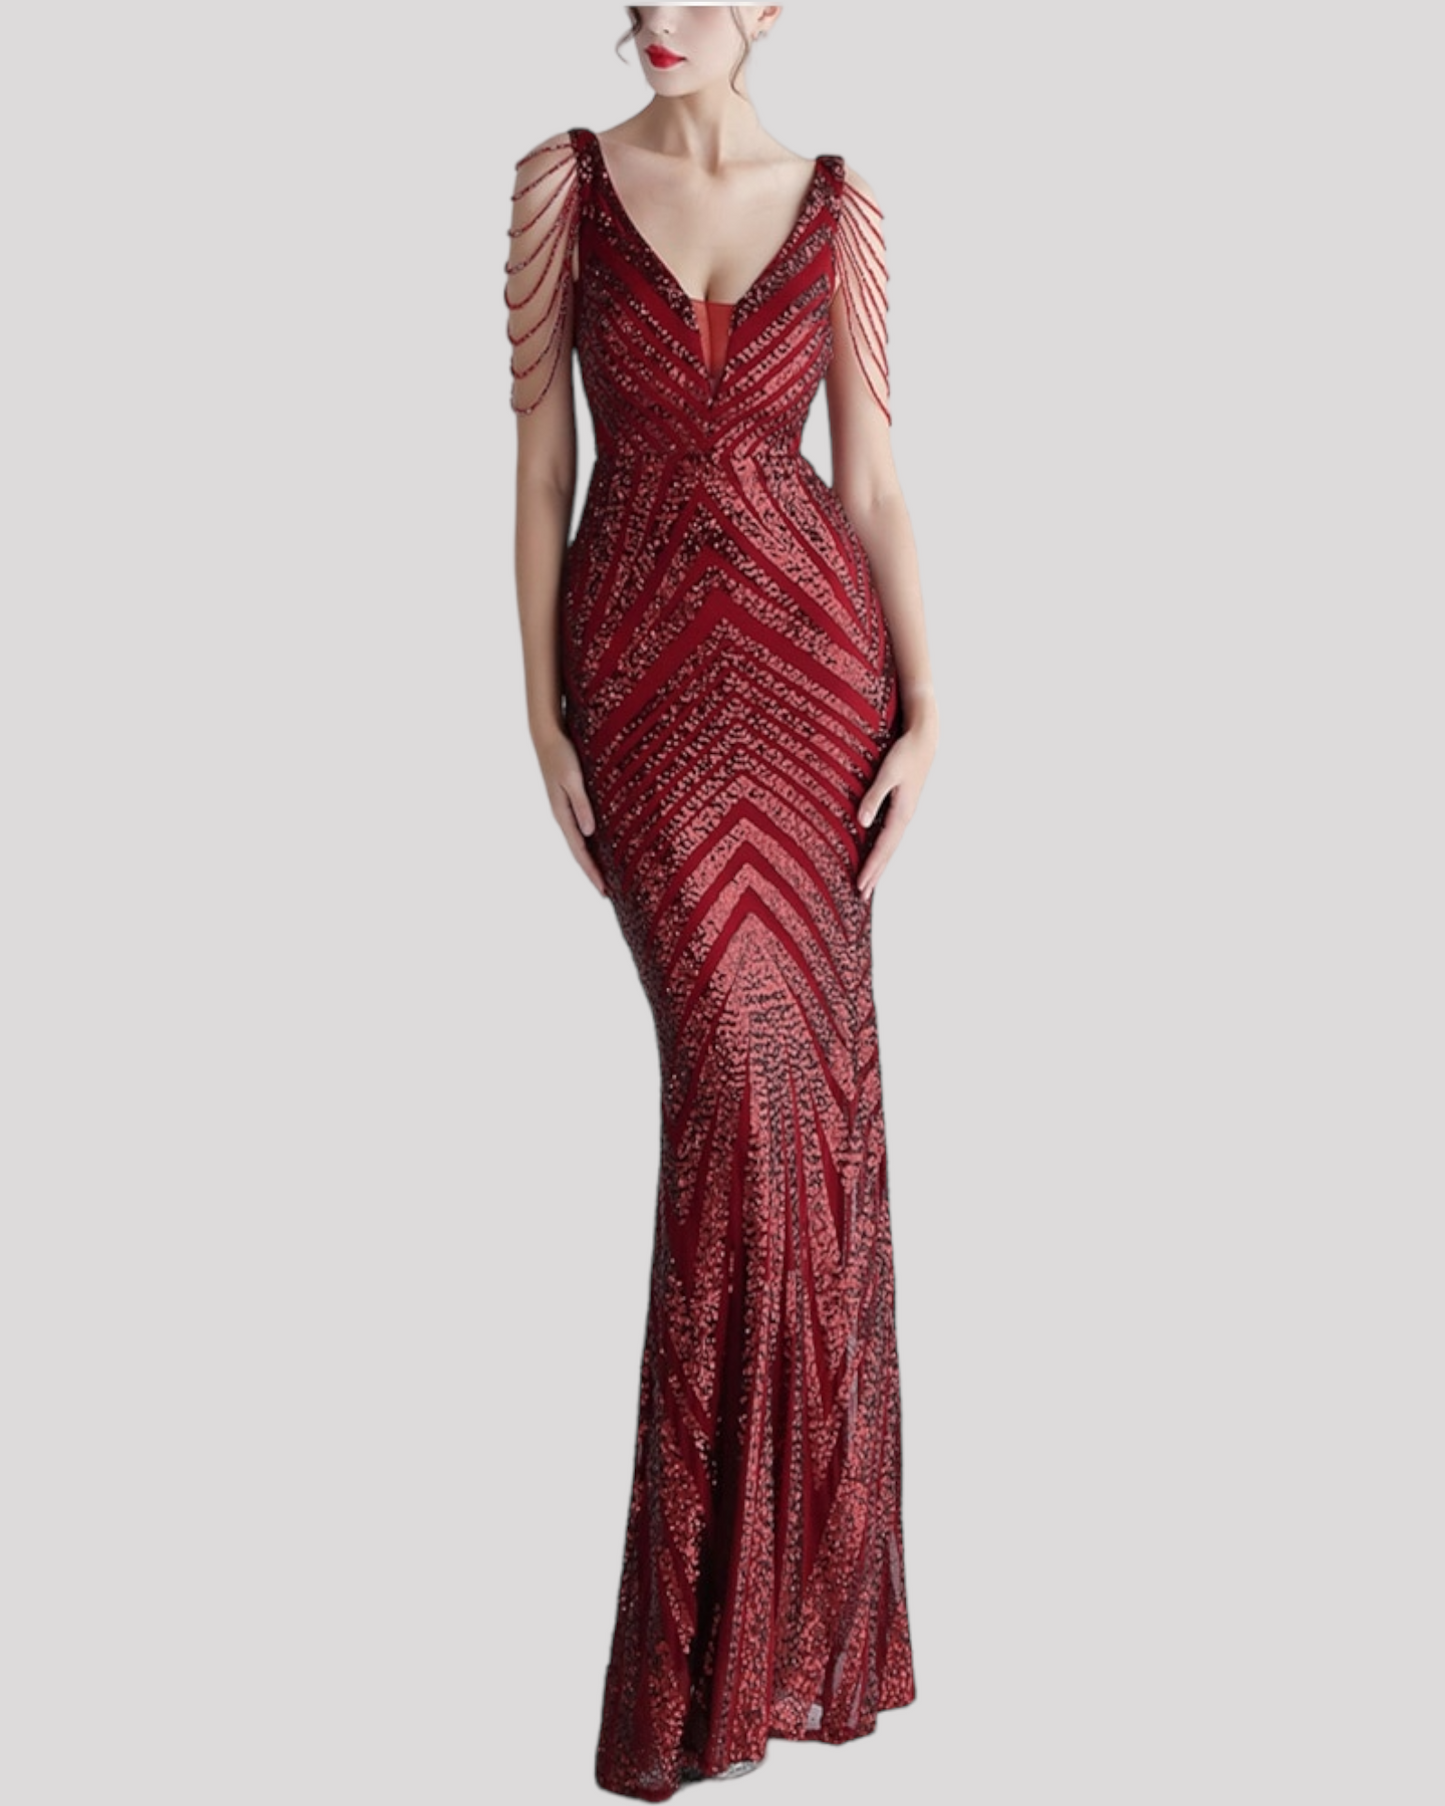 Stunning Mermaid Evening Dress with illusion cut outs and beading draping over shoulders